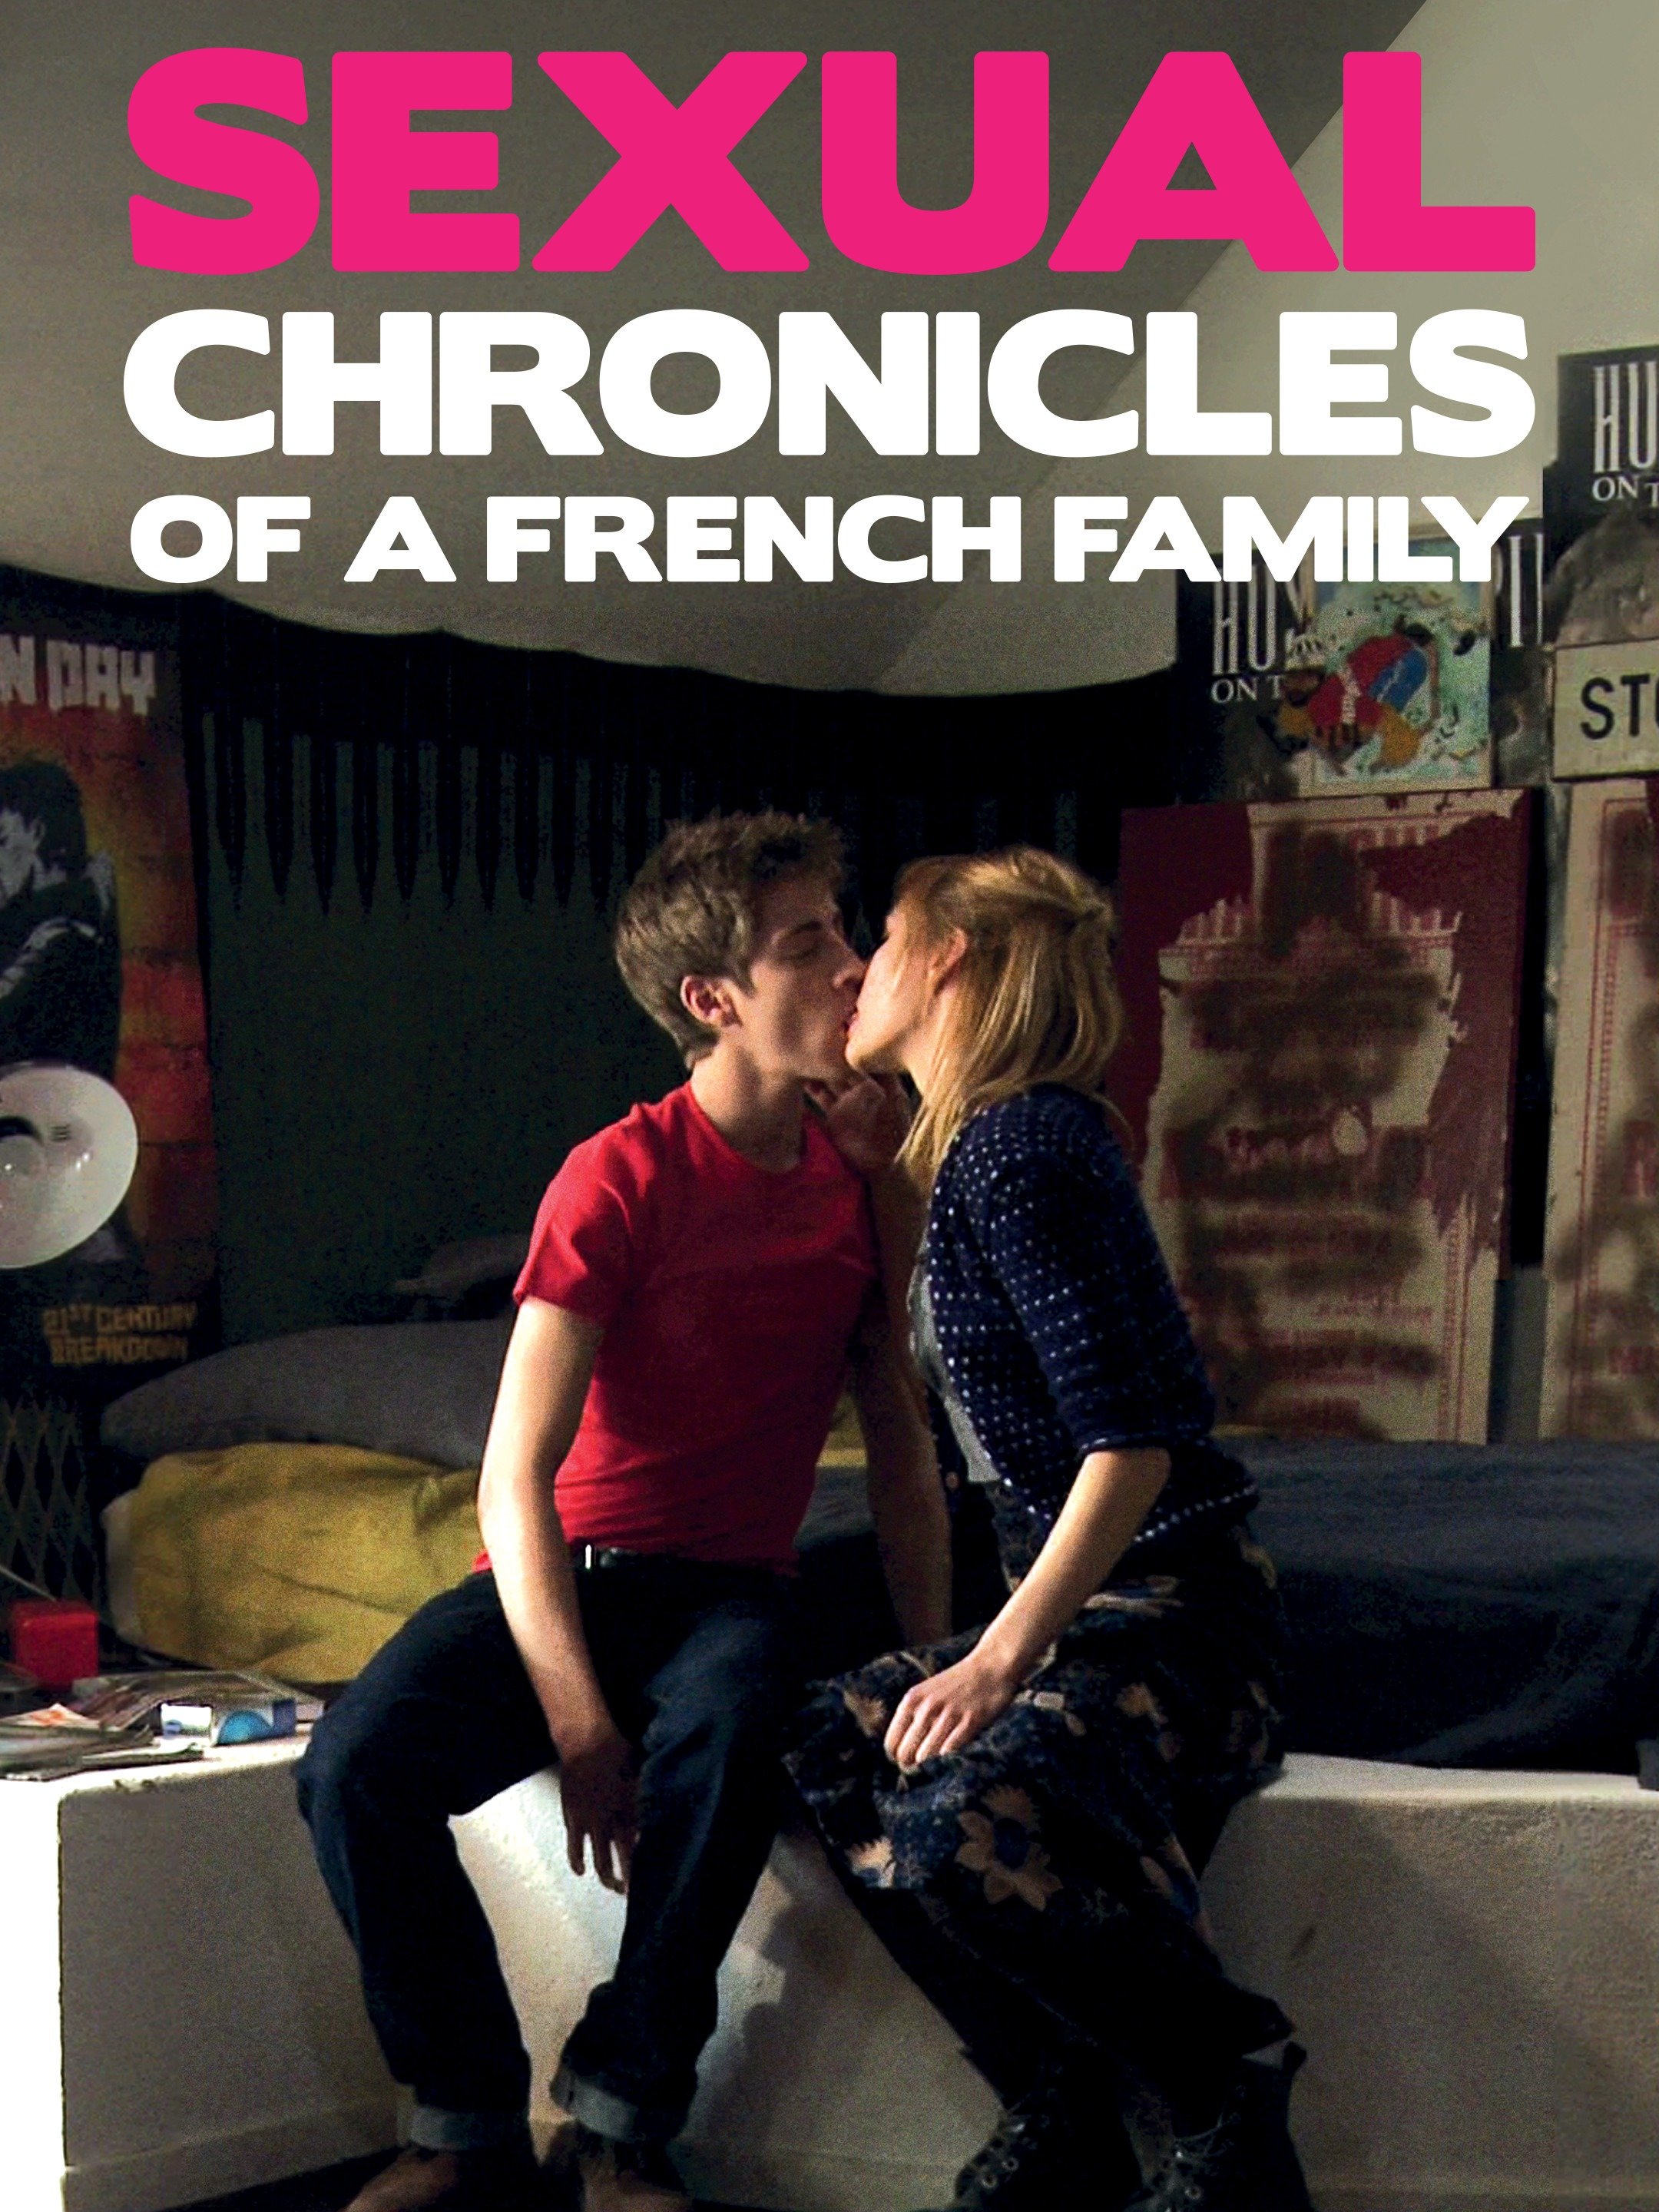 Chronicles french family